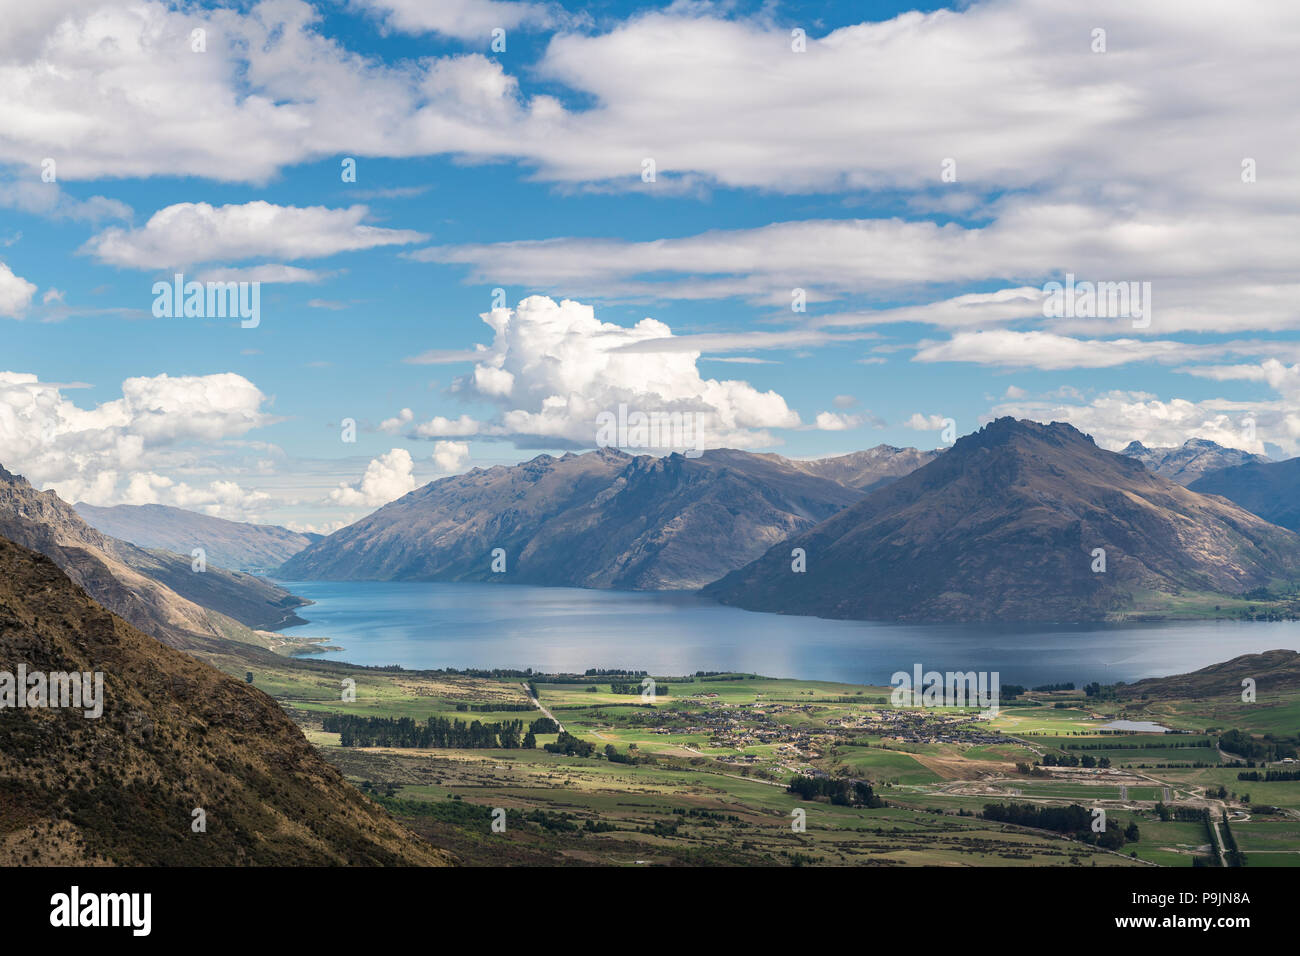 View from The Remarkables to Lake Wakatipu and mountains, Queenstown, Otago, South Island, New Zealand Stock Photo